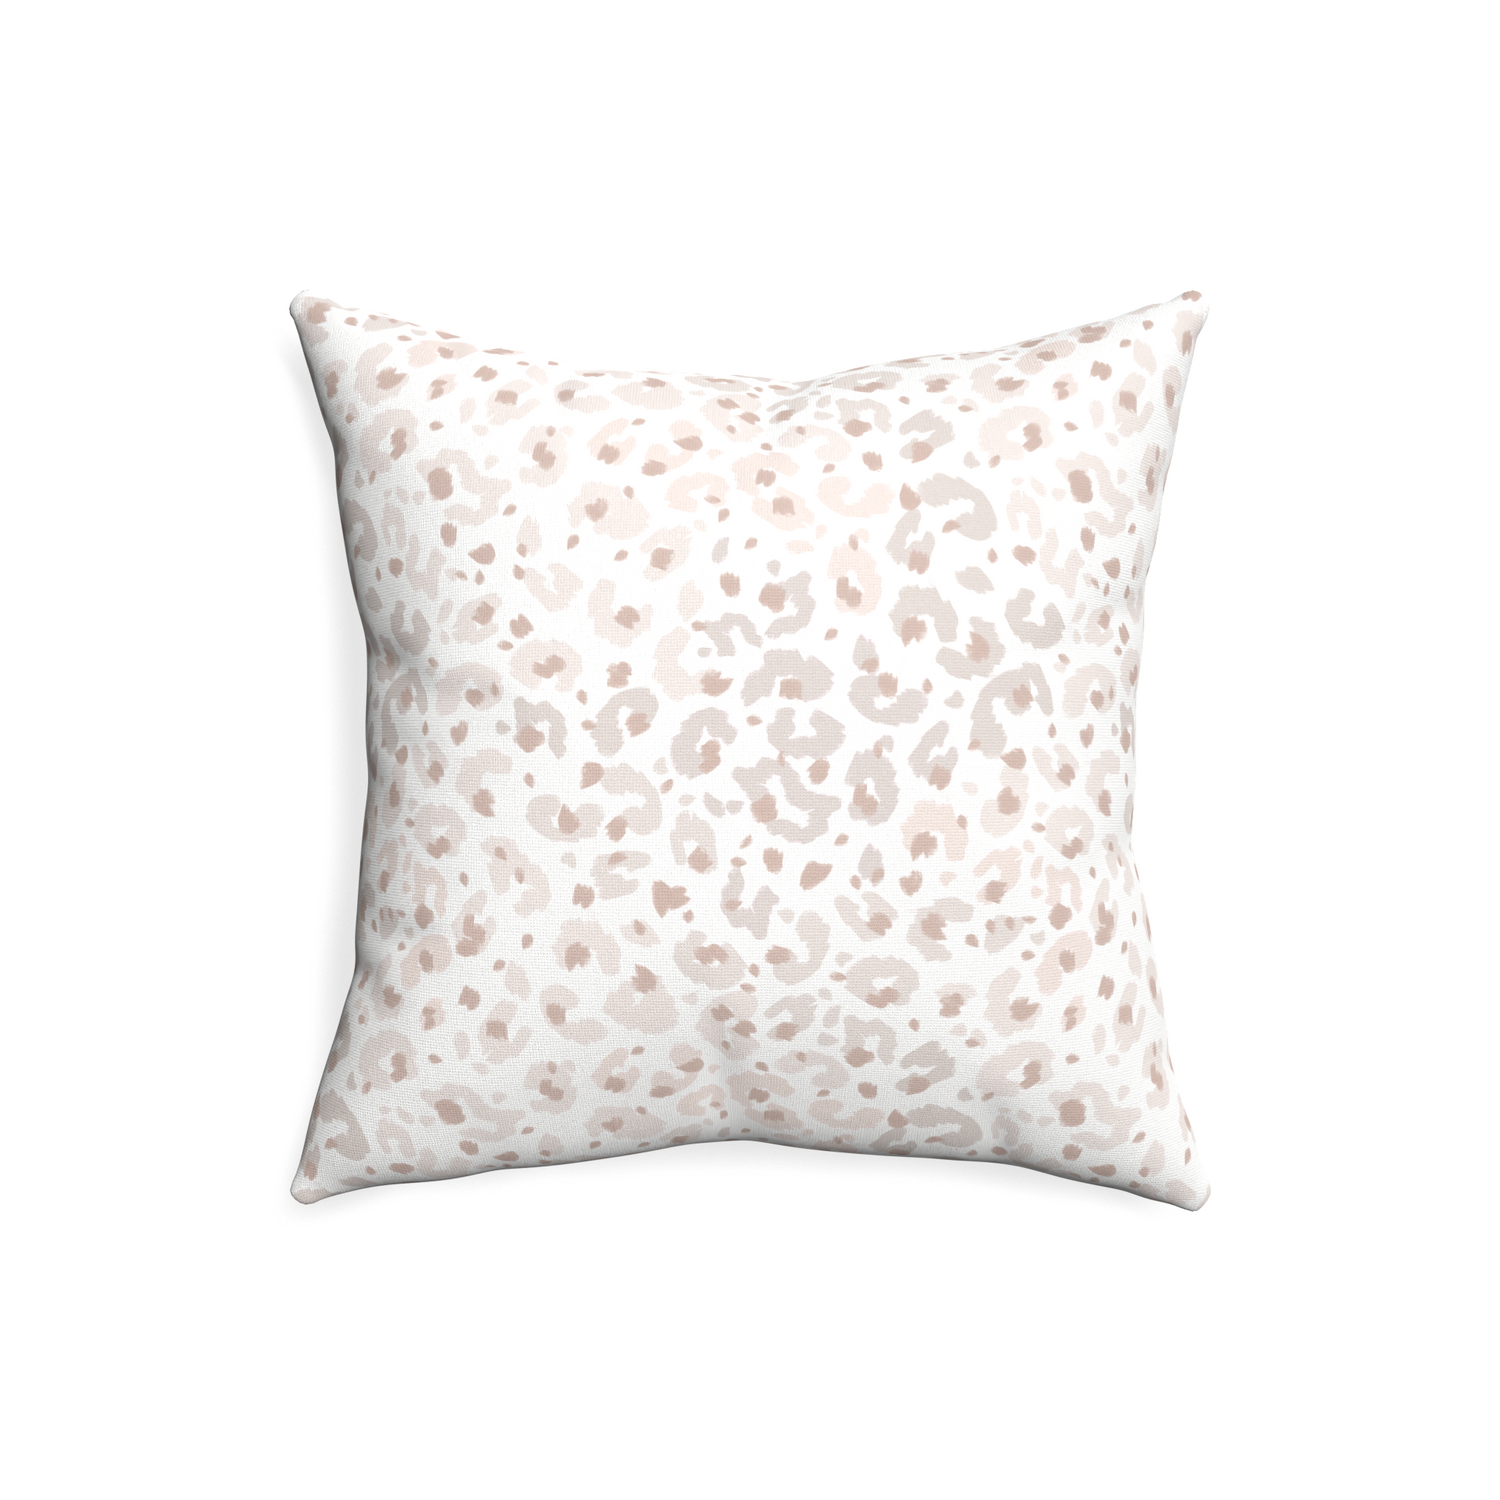 20-square rosie custom pillow with none on white background